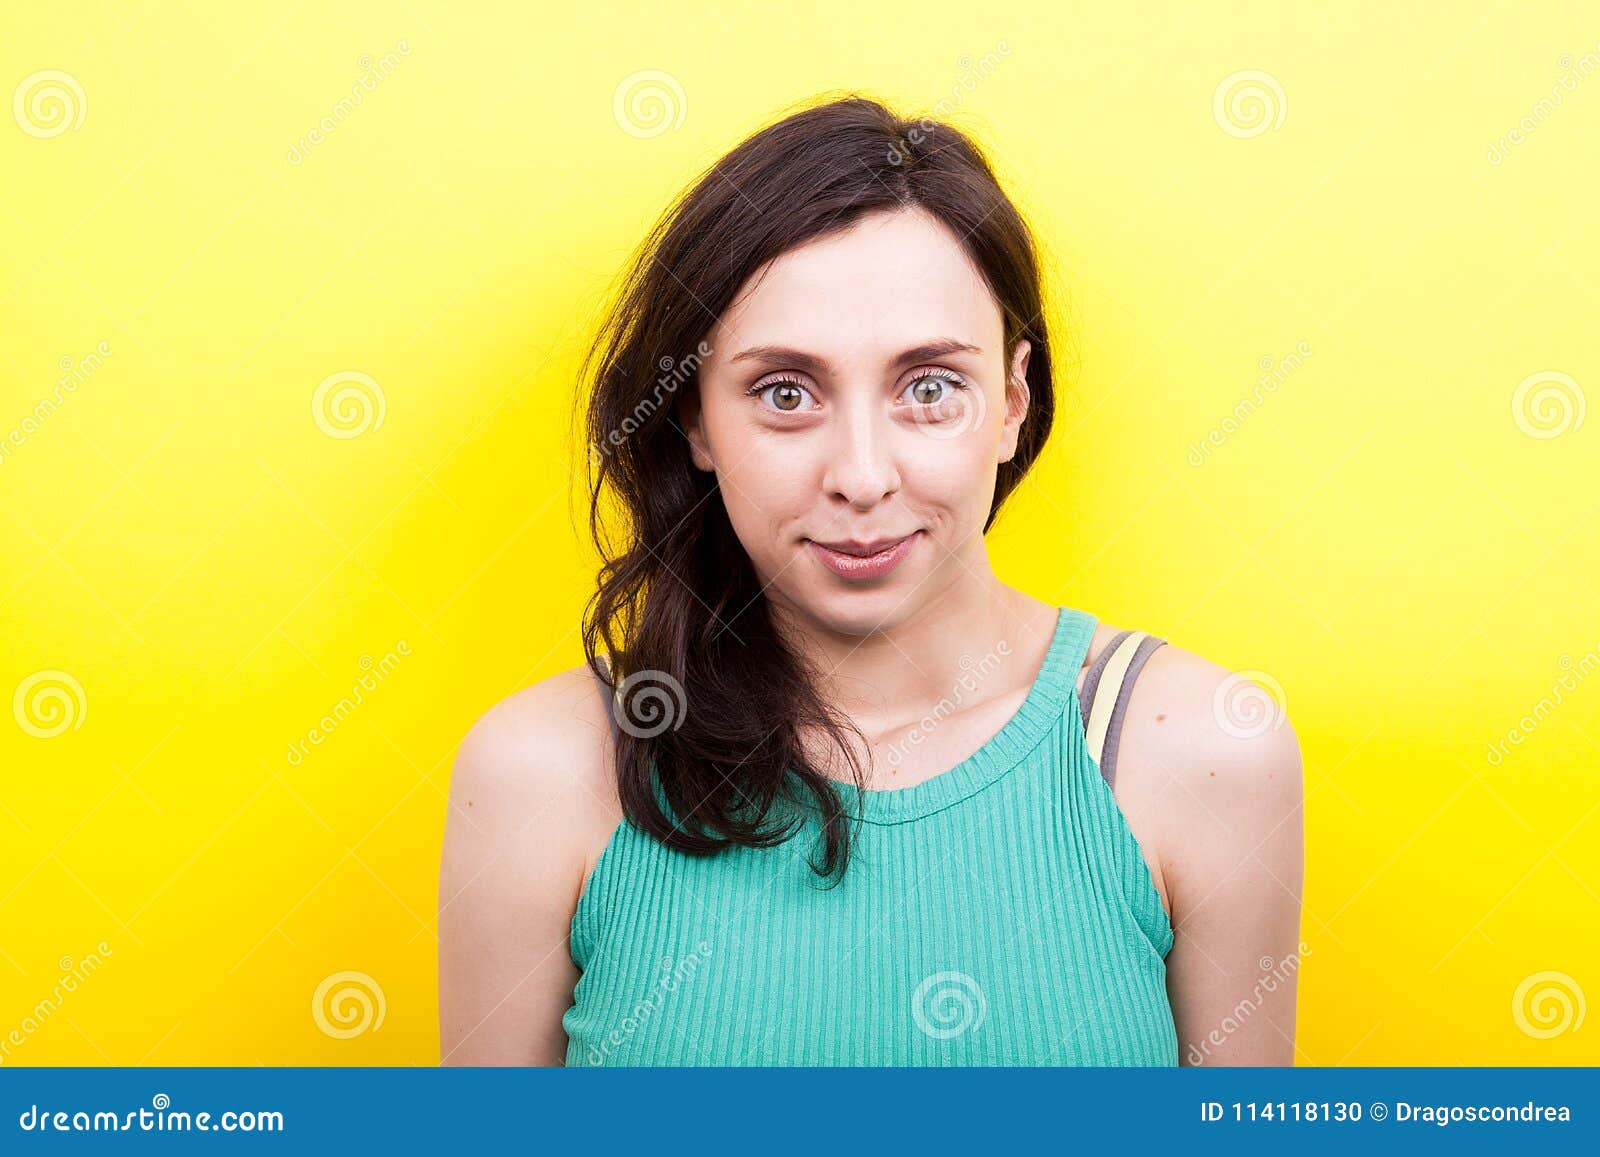 Face of Real Young Woman Looking To the Camera Stock Photo - Image of ...